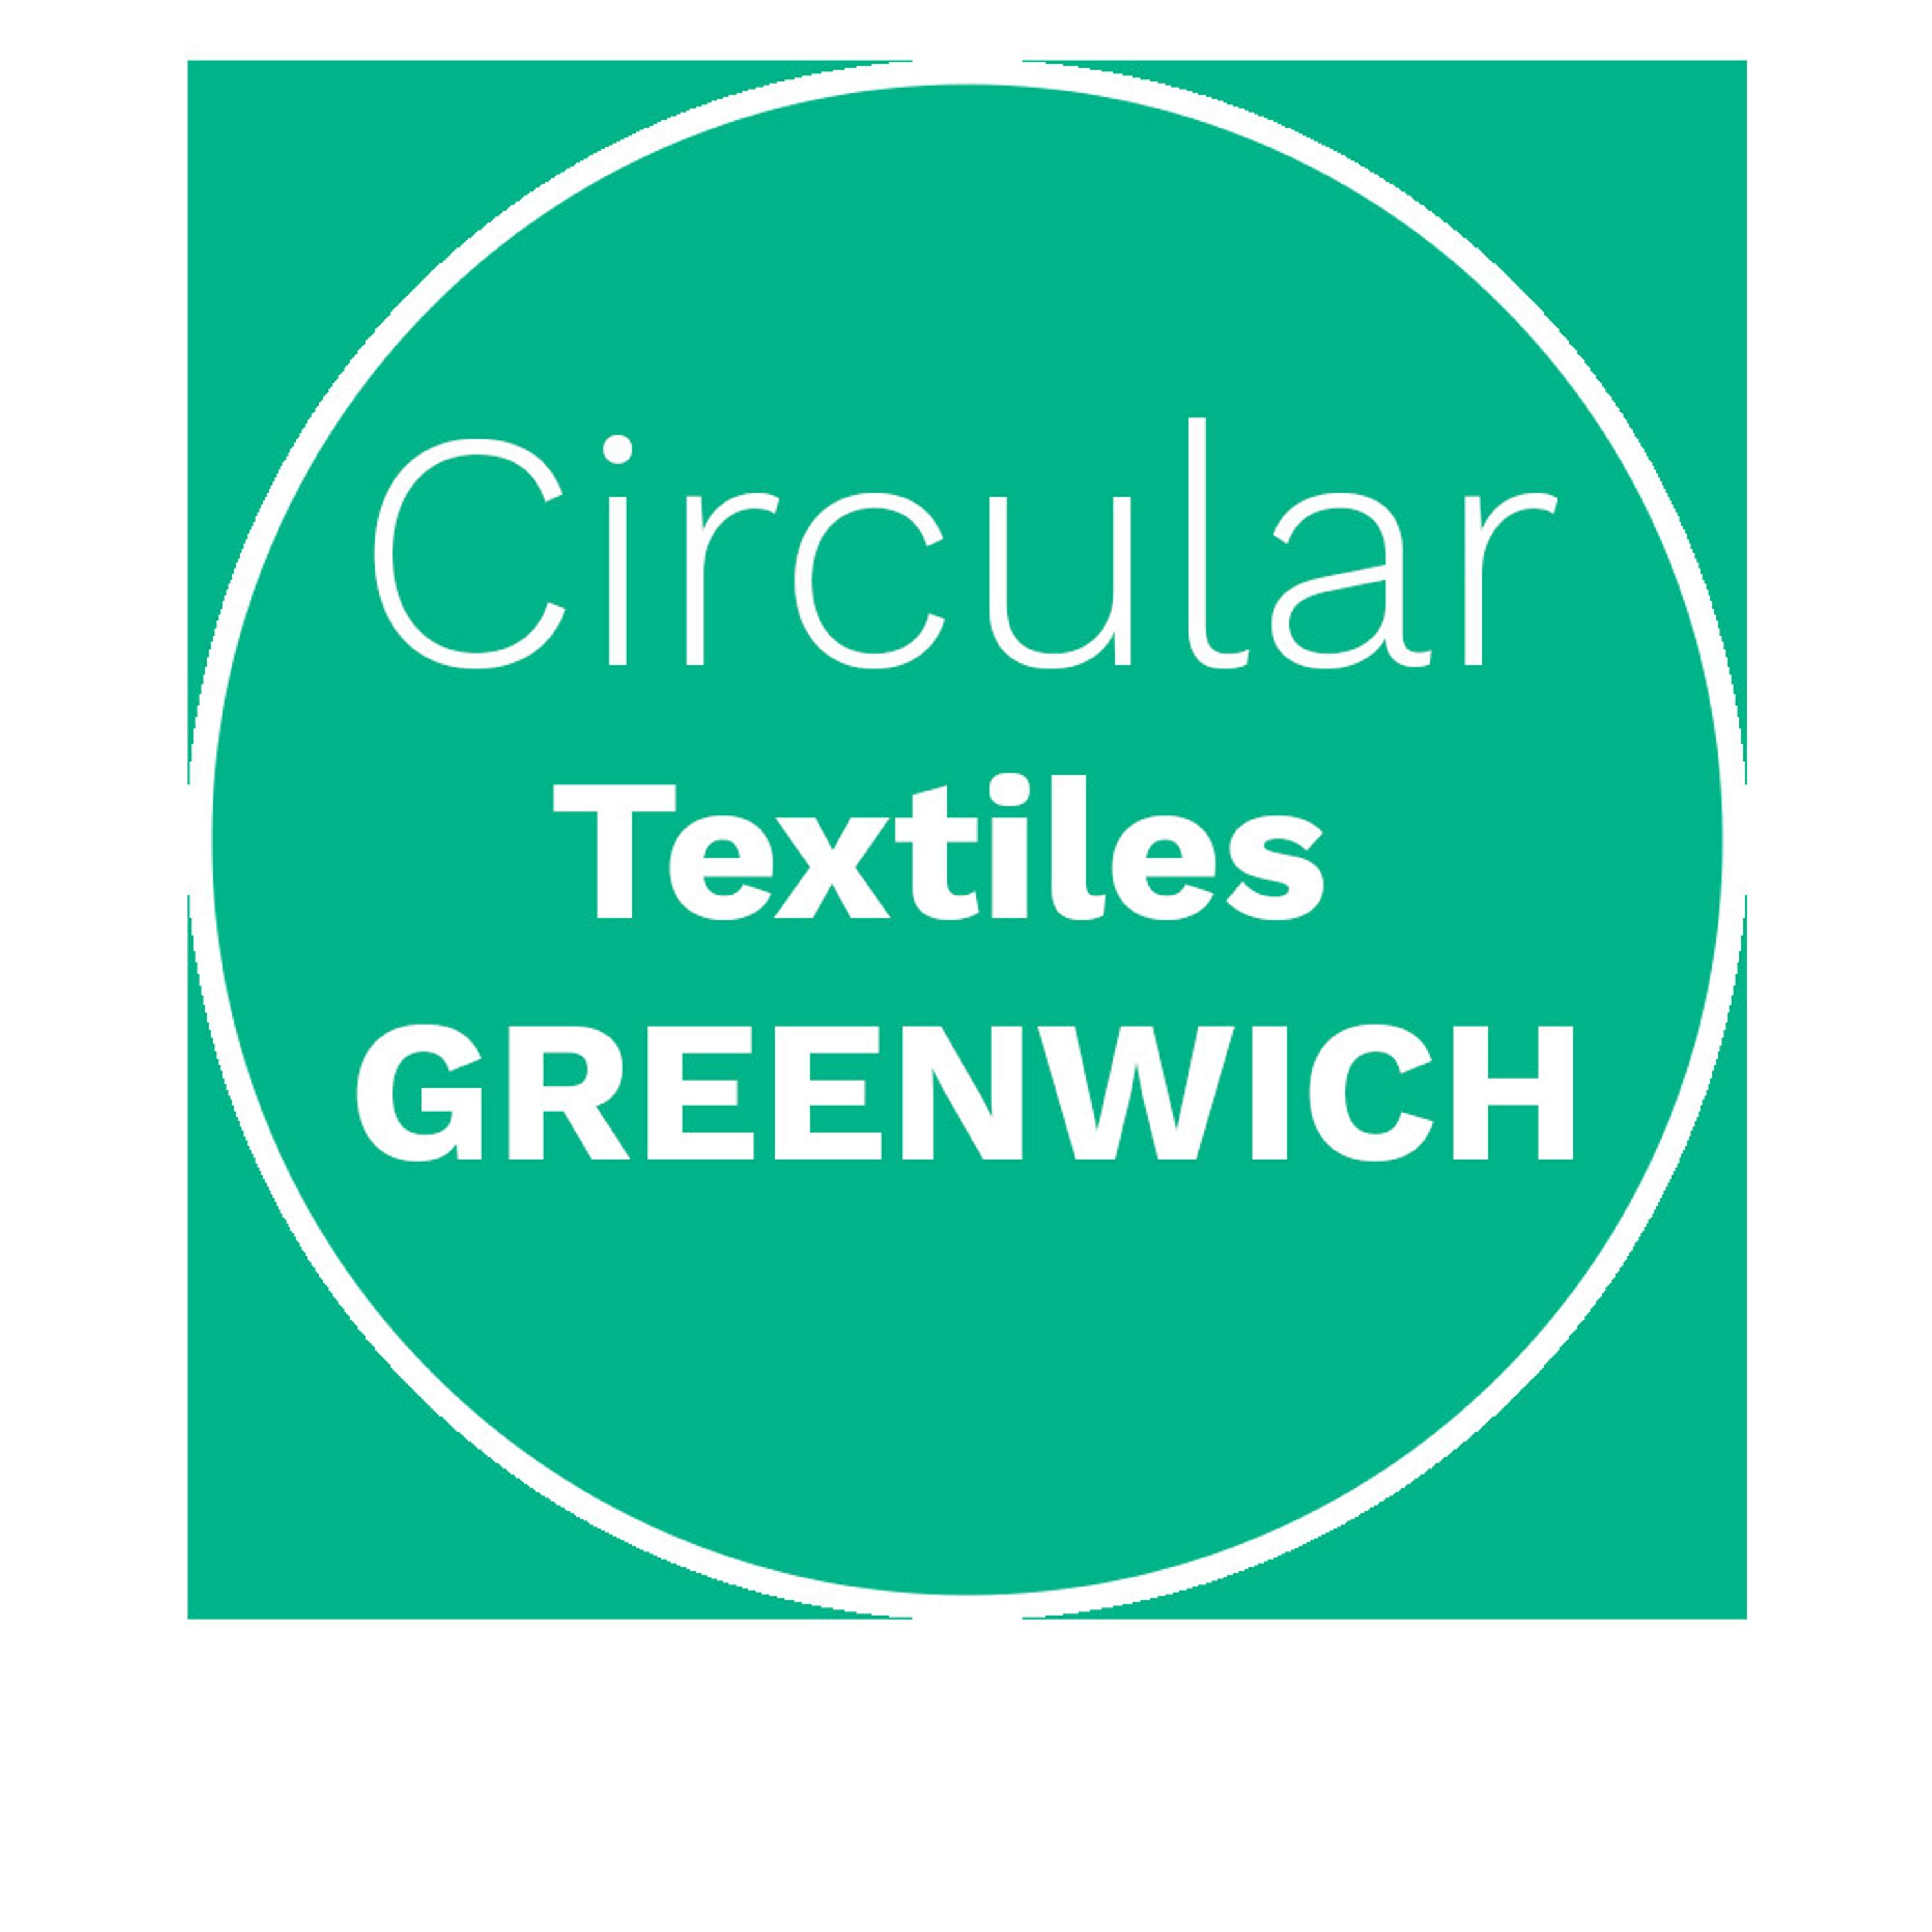 Circular Textiles Greenwich Project - Reflections